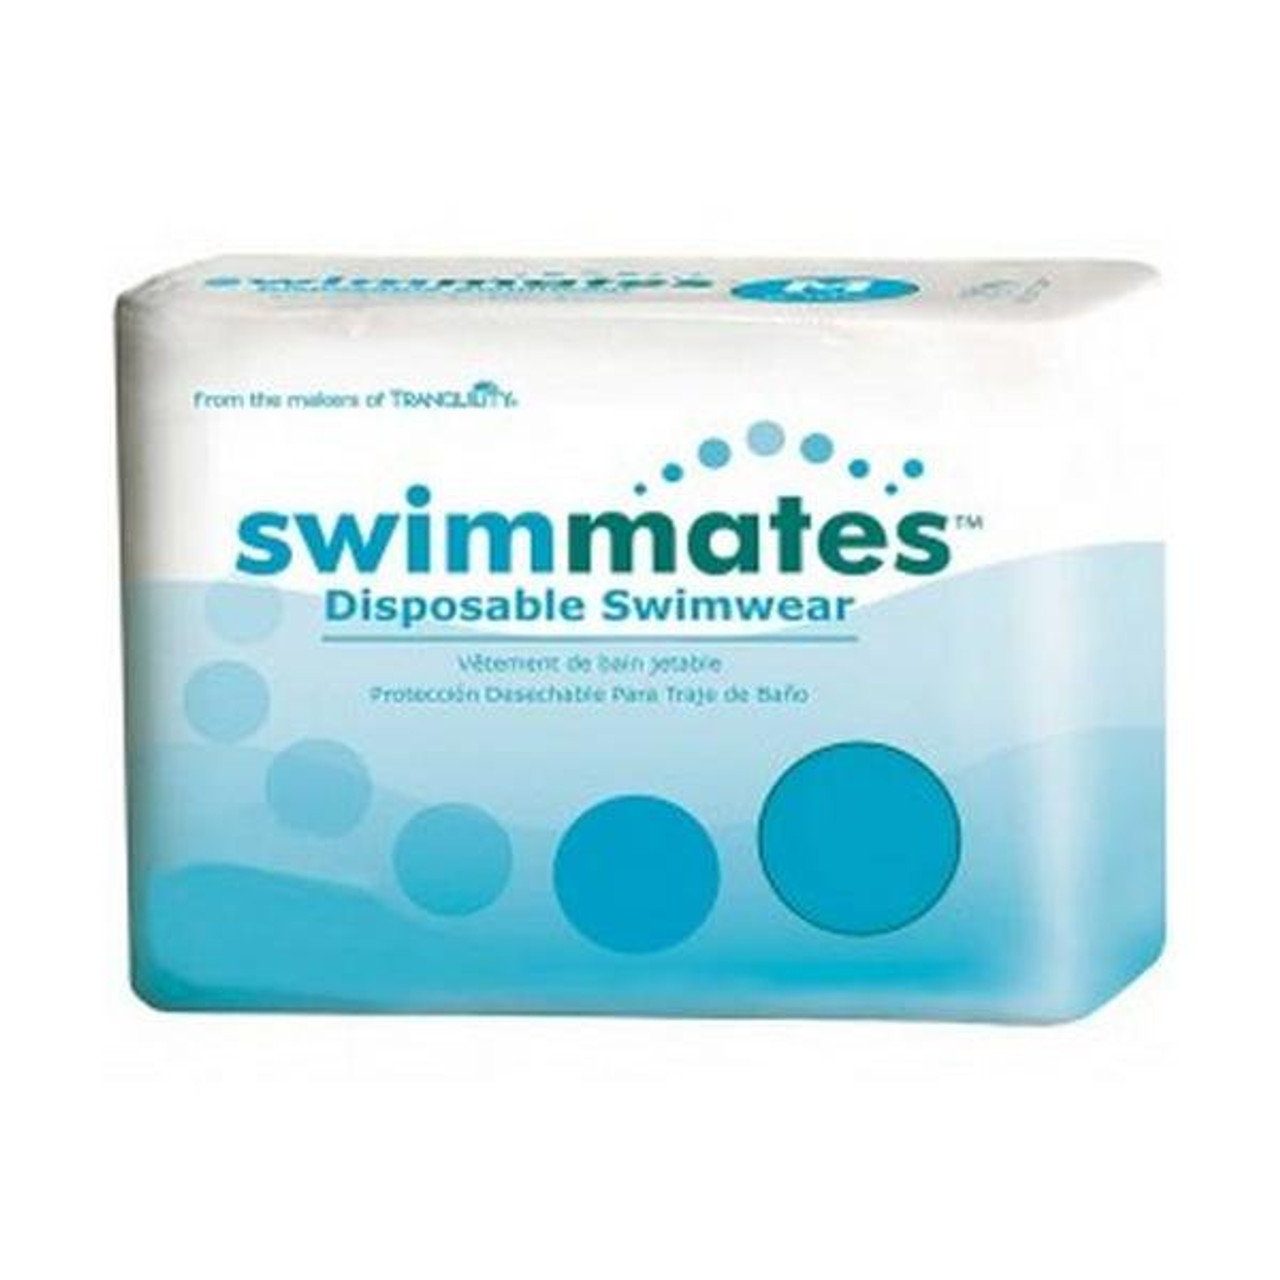 Tranquility 2847 Swimmates, XL, 48 to 66 w/h or 210-250 lbs., 4x14s